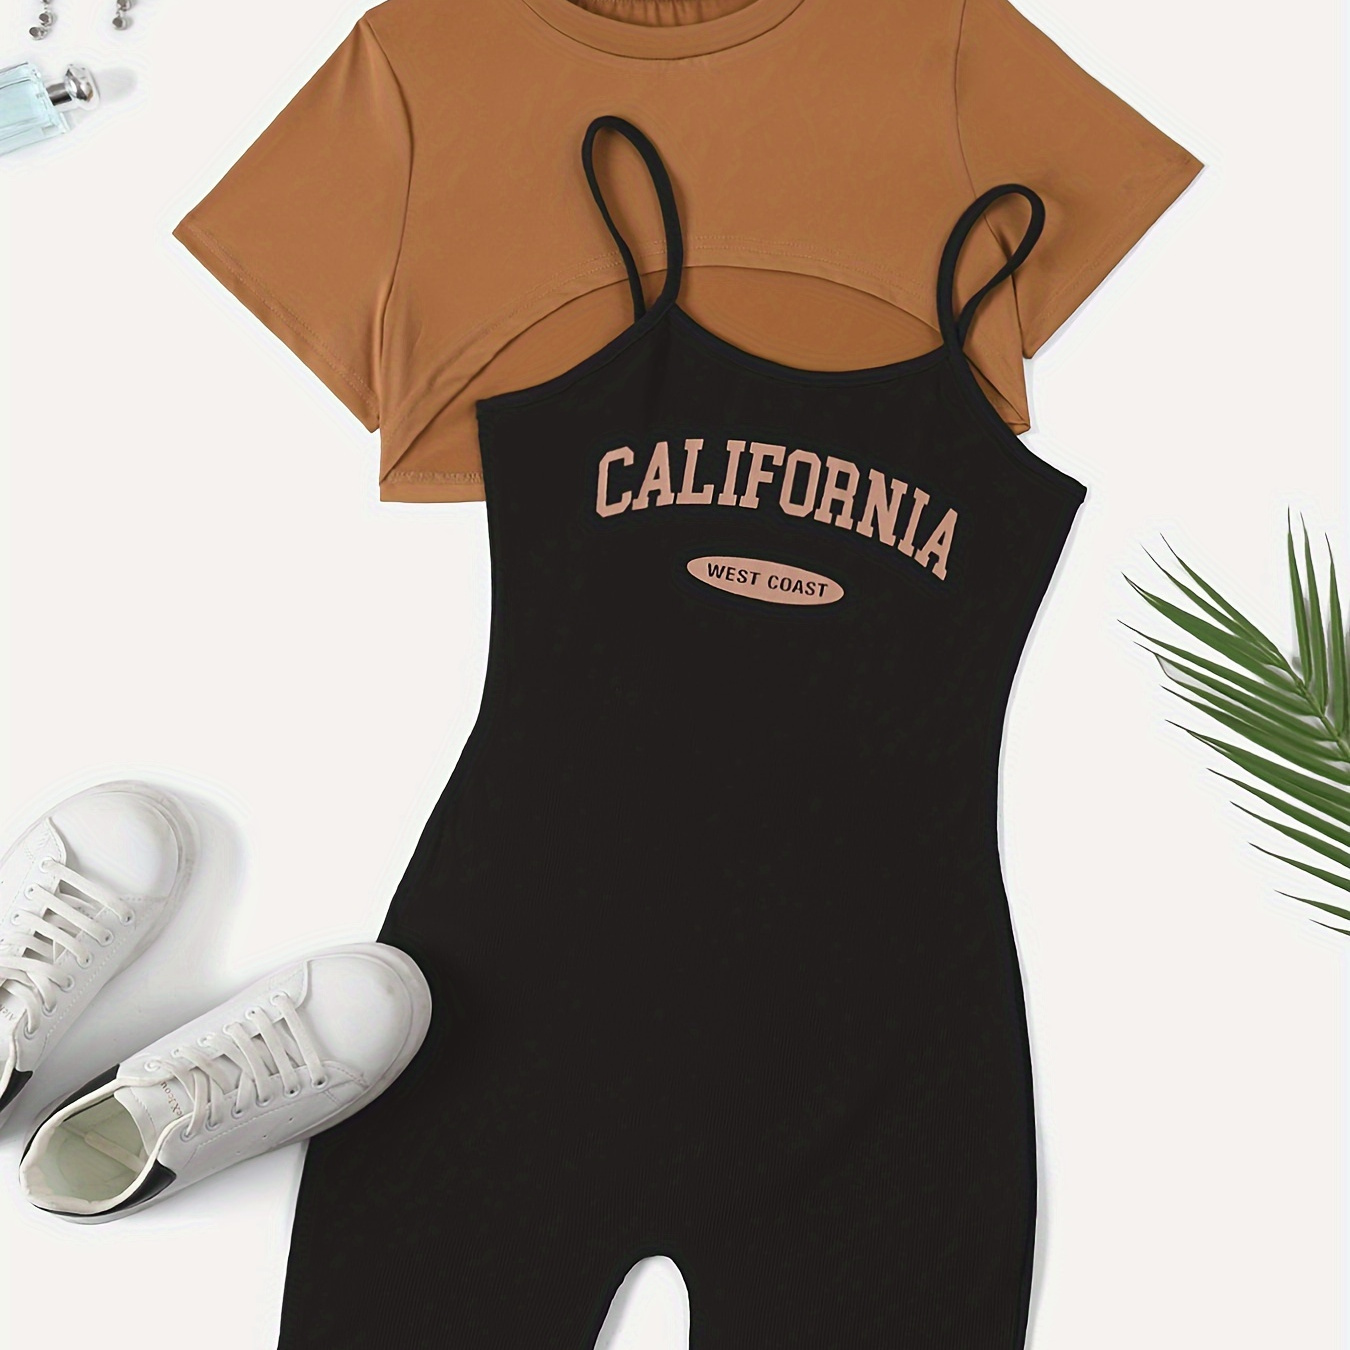 

California Print Casual Romper Jumpsuit Set, Solid Color Crew Neck Short Sleeve Crop Top & Cami Romper Jumpsuit Outfits, Women's Clothing